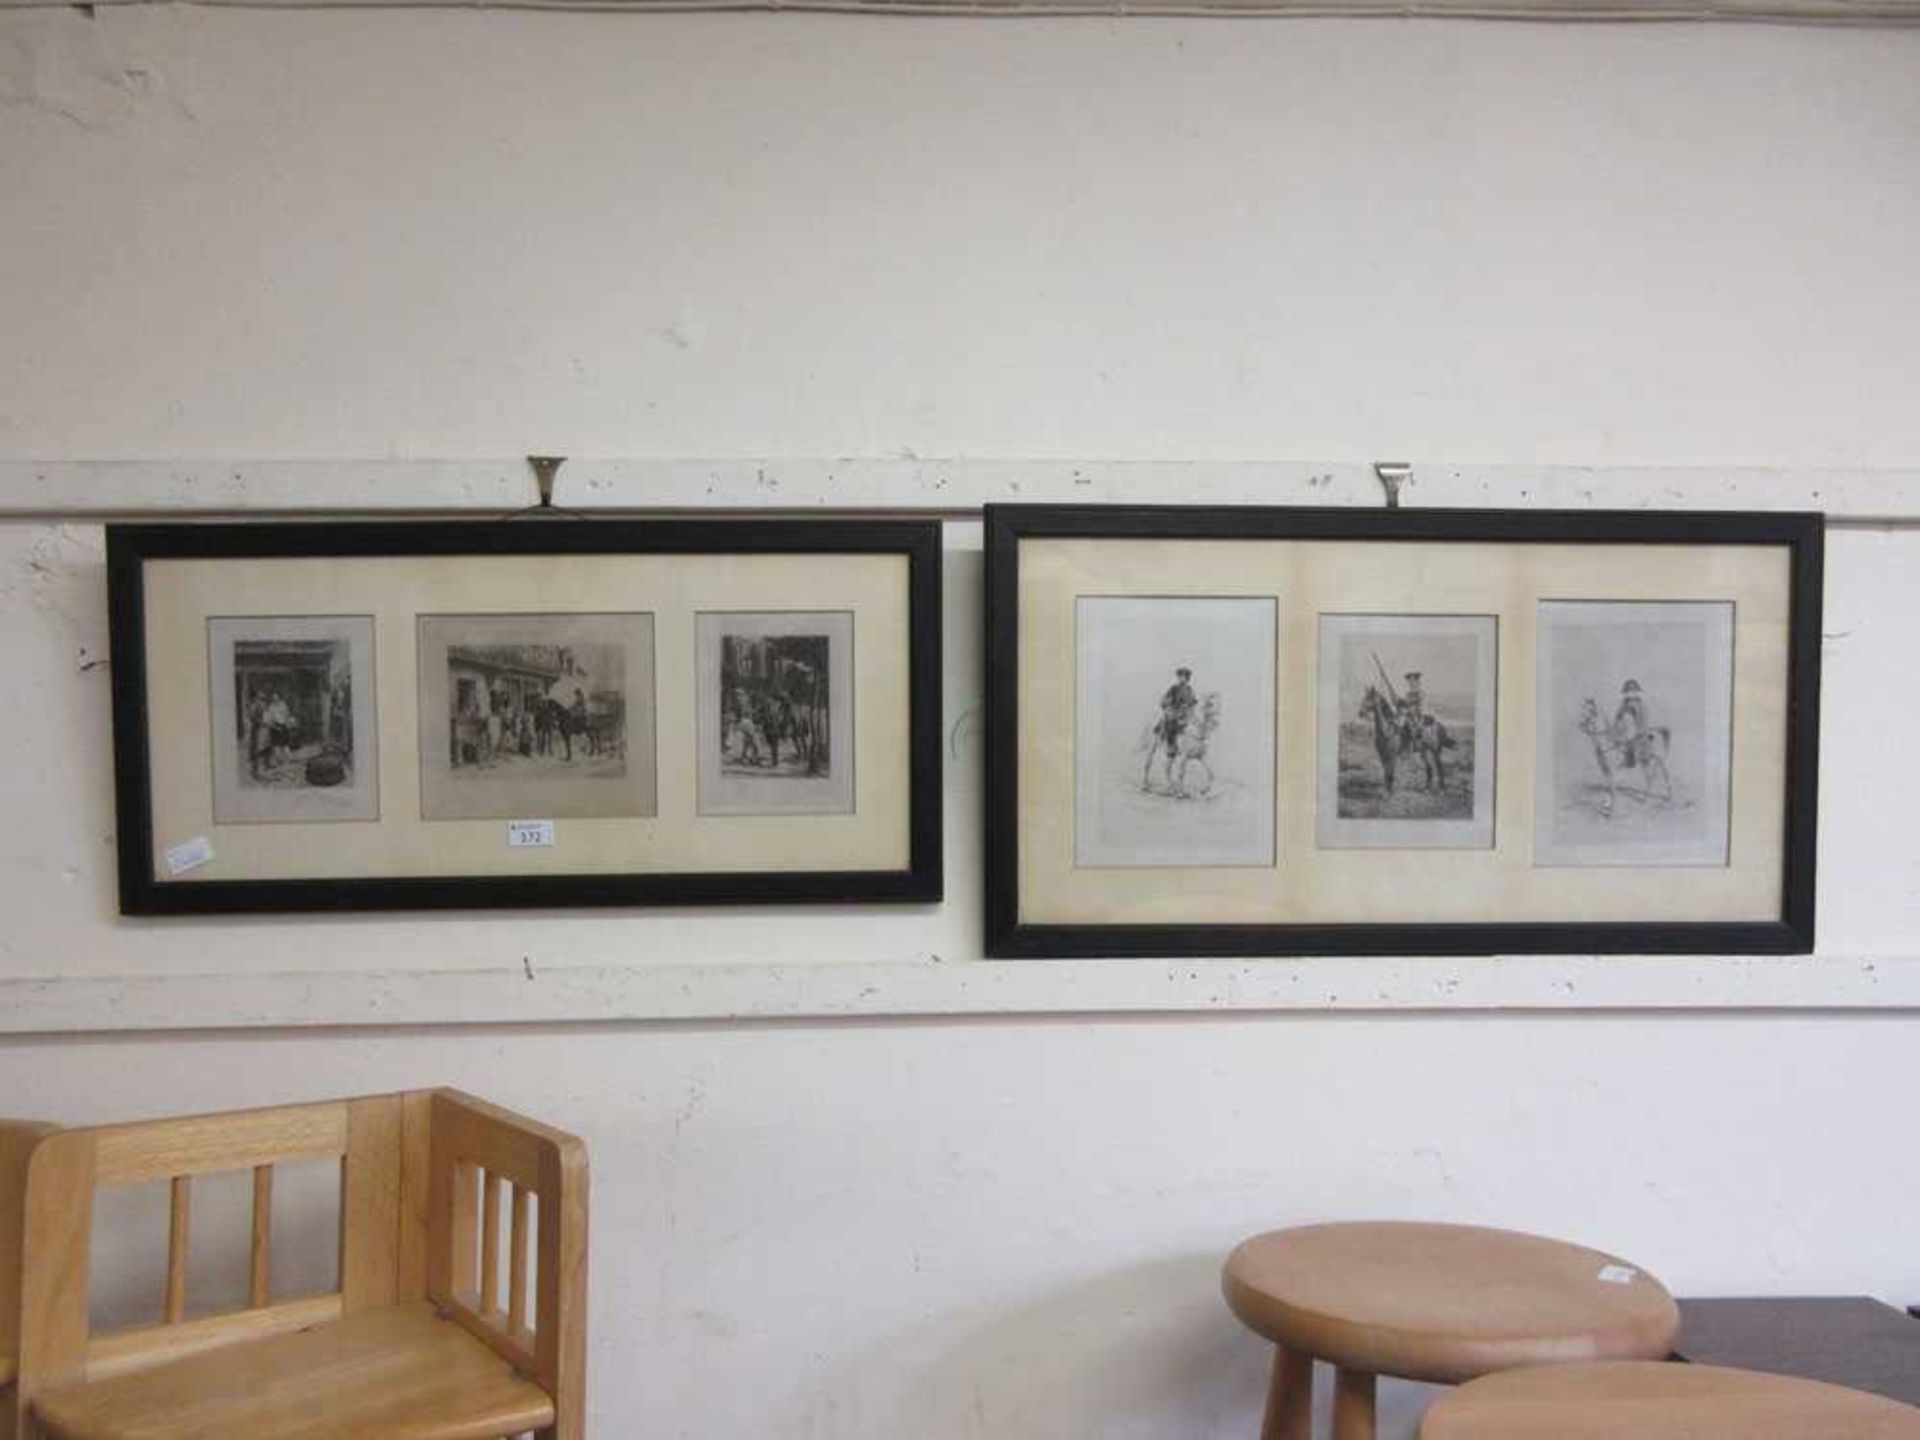 Two framed and glazed artworks of collections of sketches of horsemen